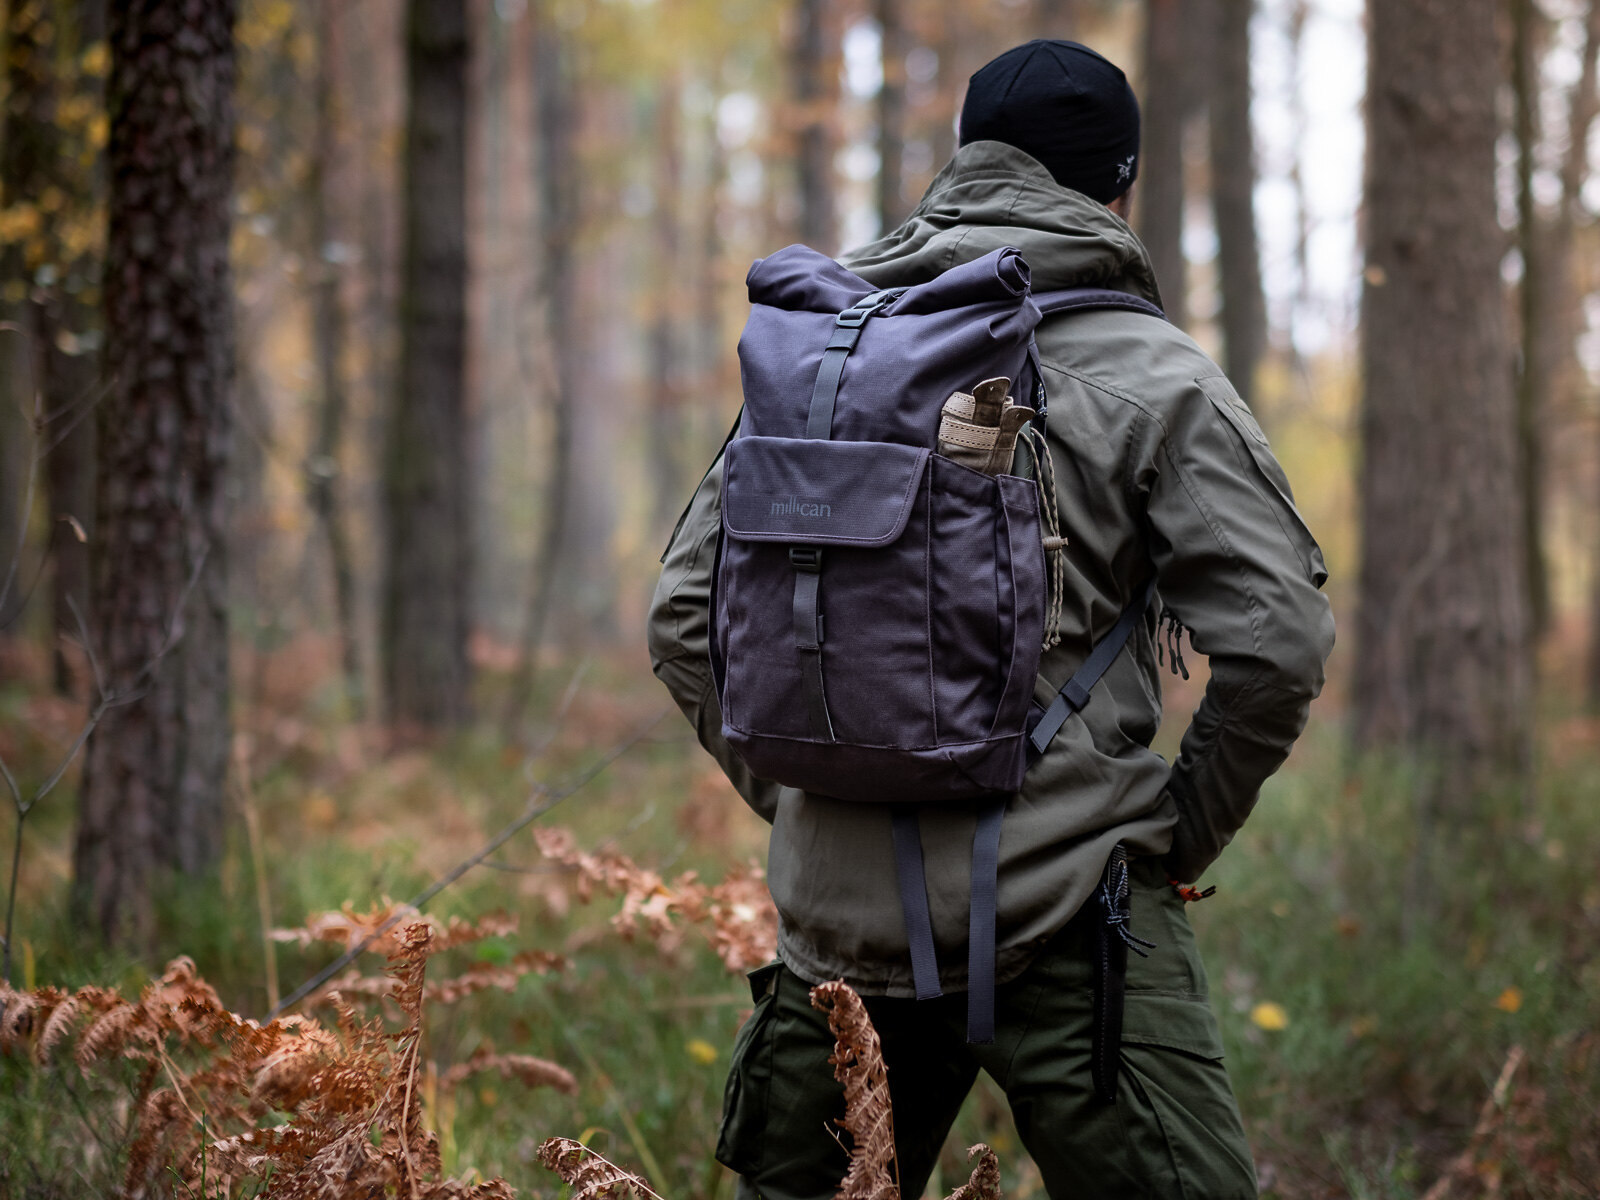 Review: Millican Maverick – Smith The Roll Pack 25L | Pack Config